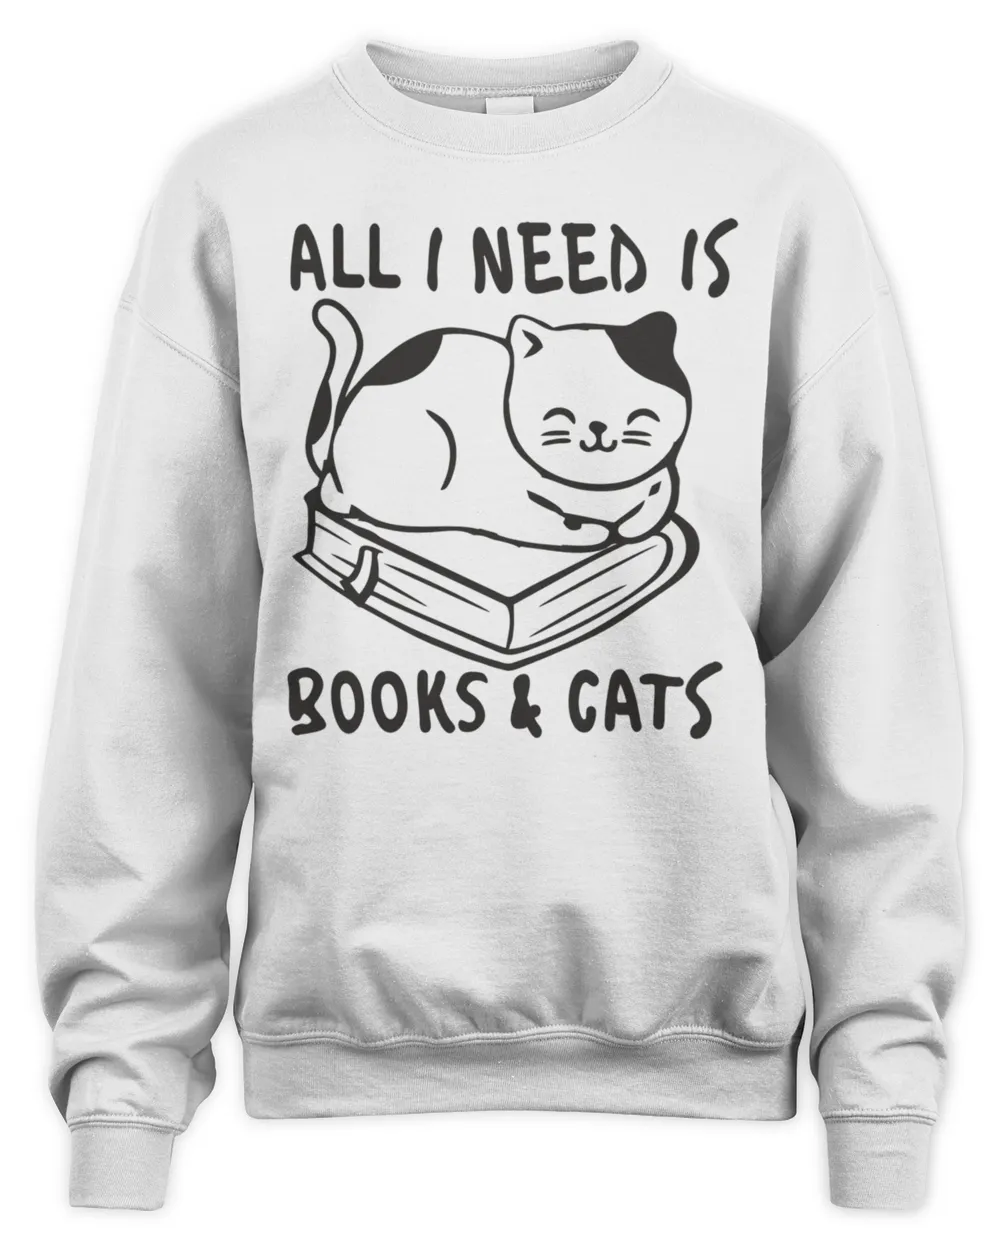 All I Need Is Books & Cats Lover Cute Bookworm T-Shirt